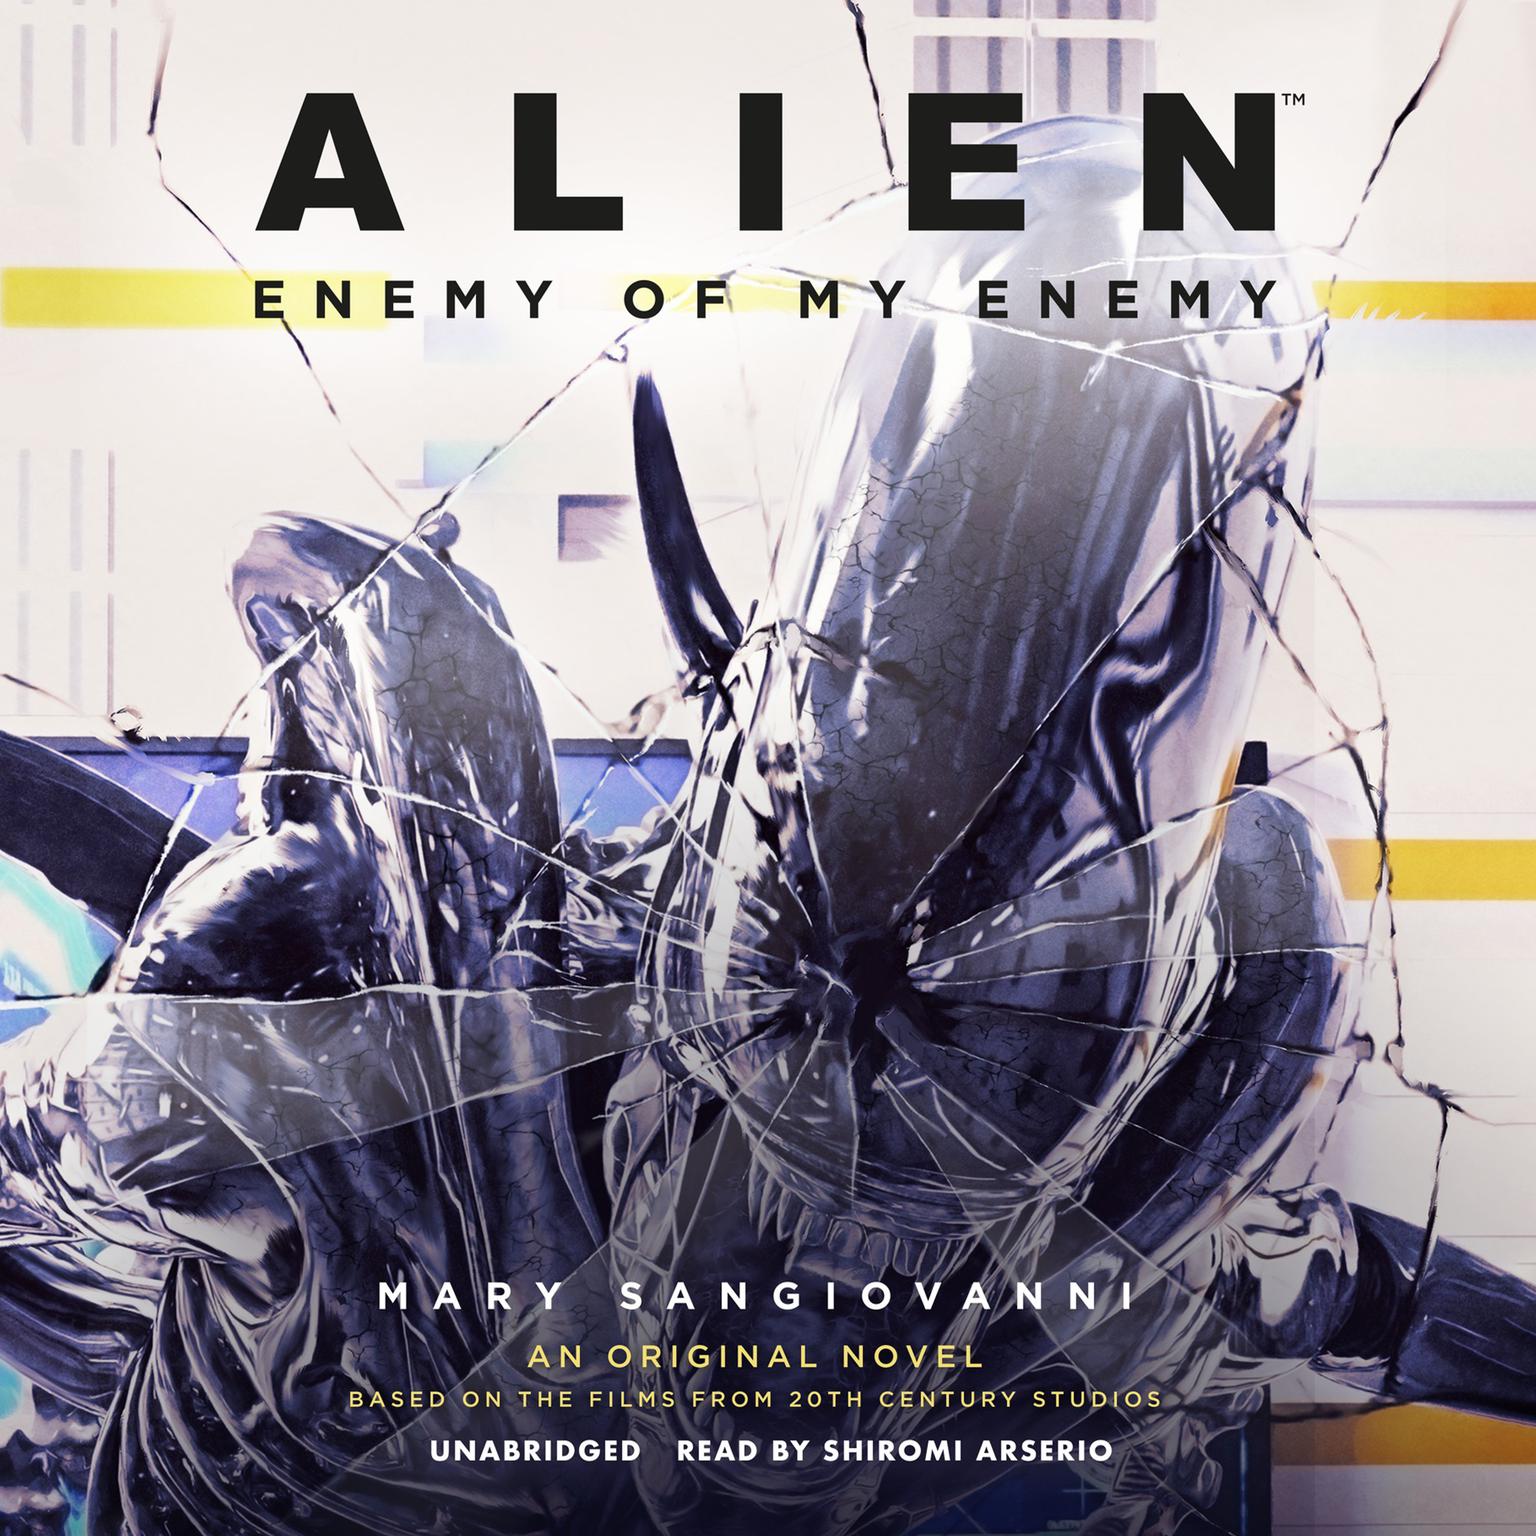 Alien: Enemy of My Enemy: An Original Novel Based on the Films from 20th Century Studios Audiobook, by Mary SanGiovanni